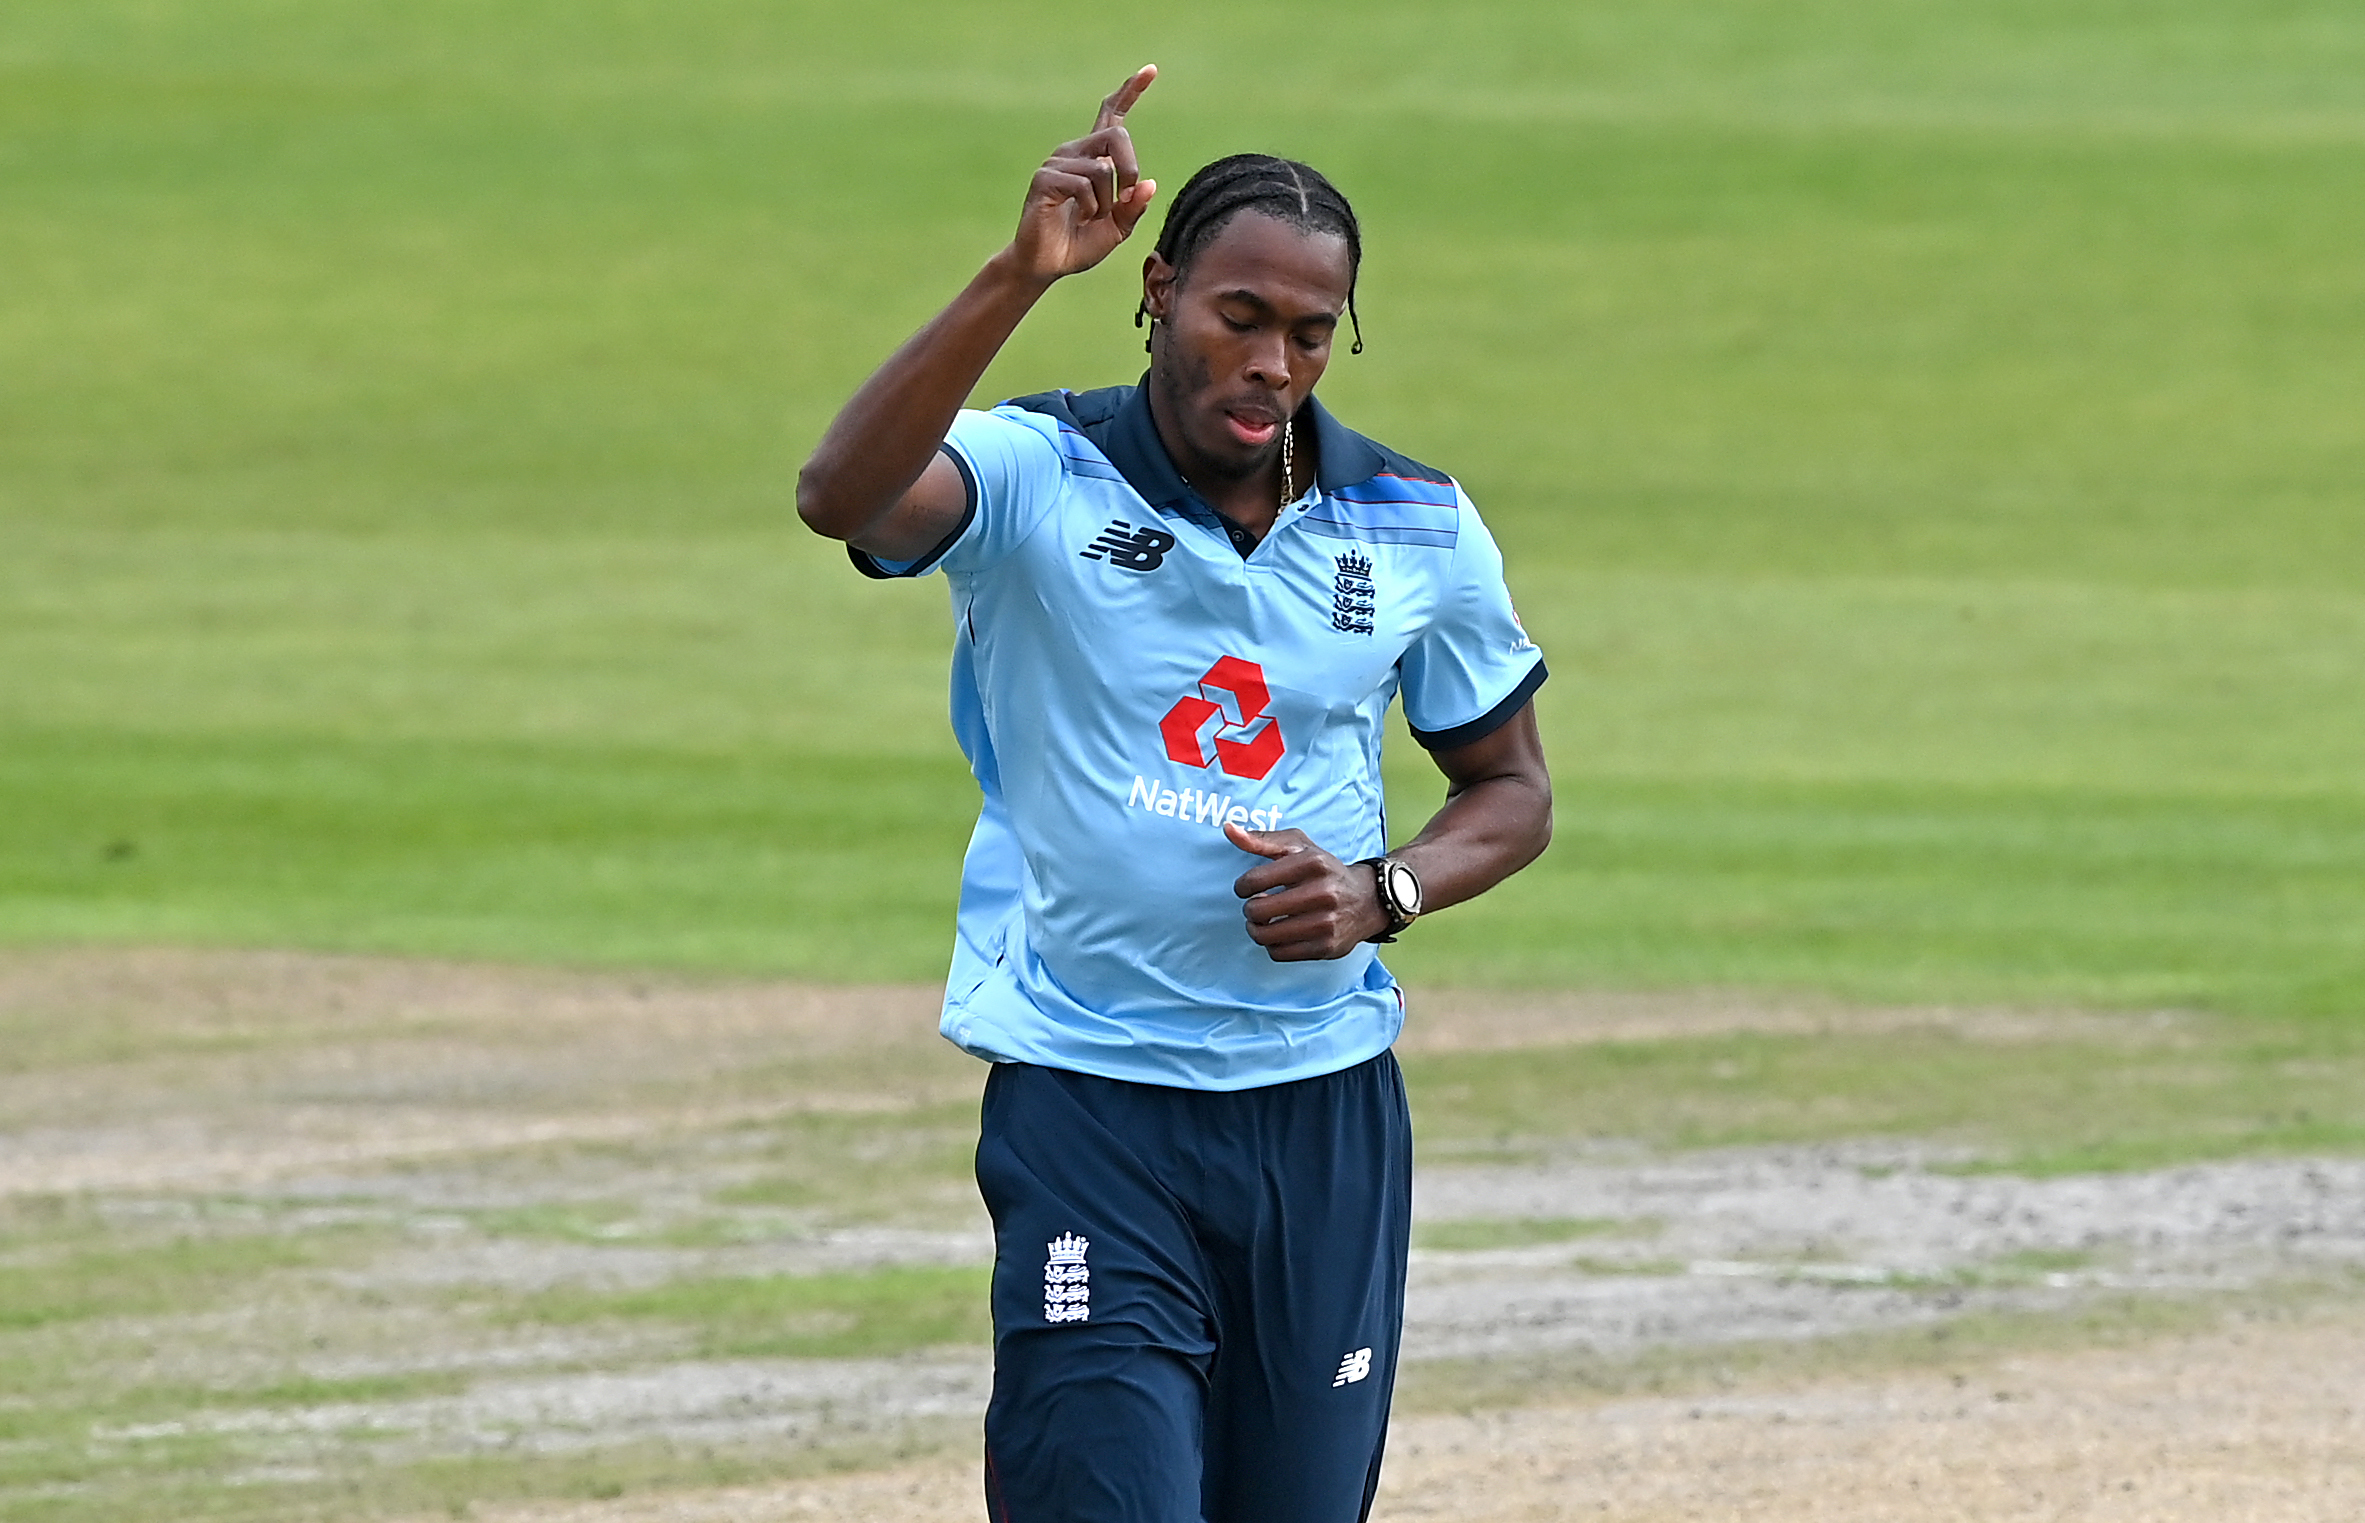 Gus Atkinson's bowling action has been likened to that of Jofra Archer, pictured (Shaun Botterill/PA)